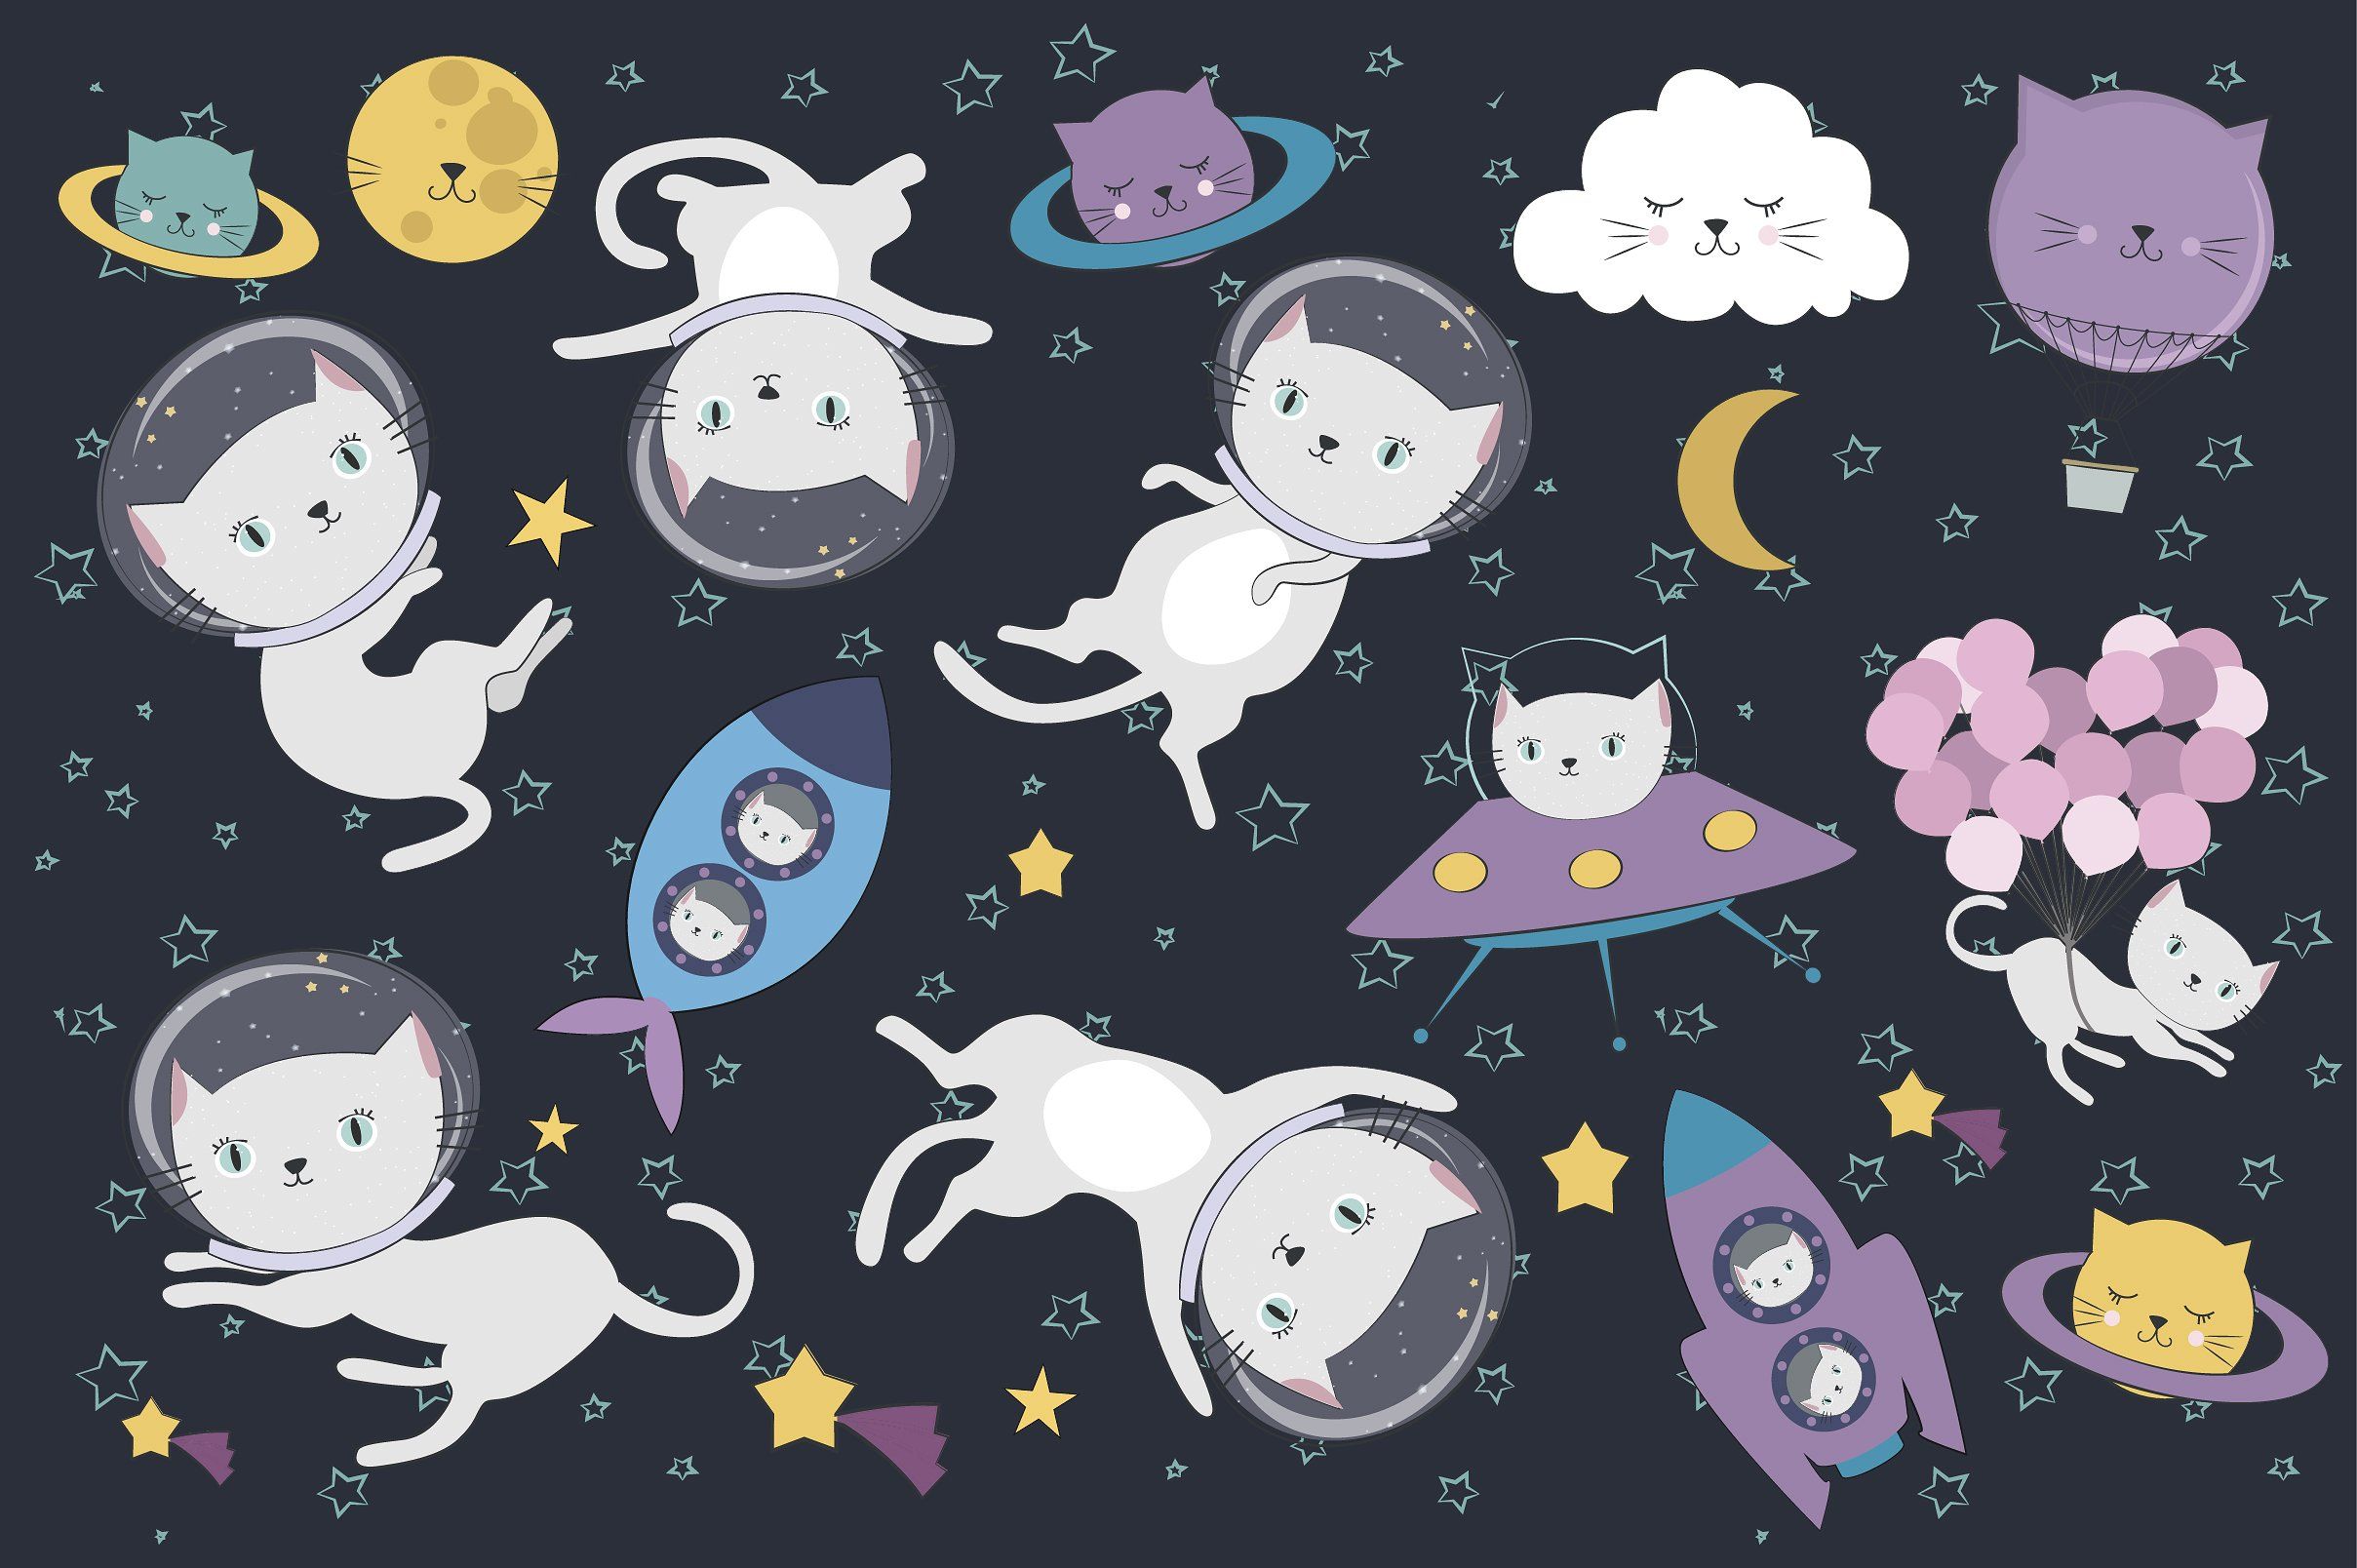 Space cats illustrations & pattern. Space cat, Space animals, Cat illustration